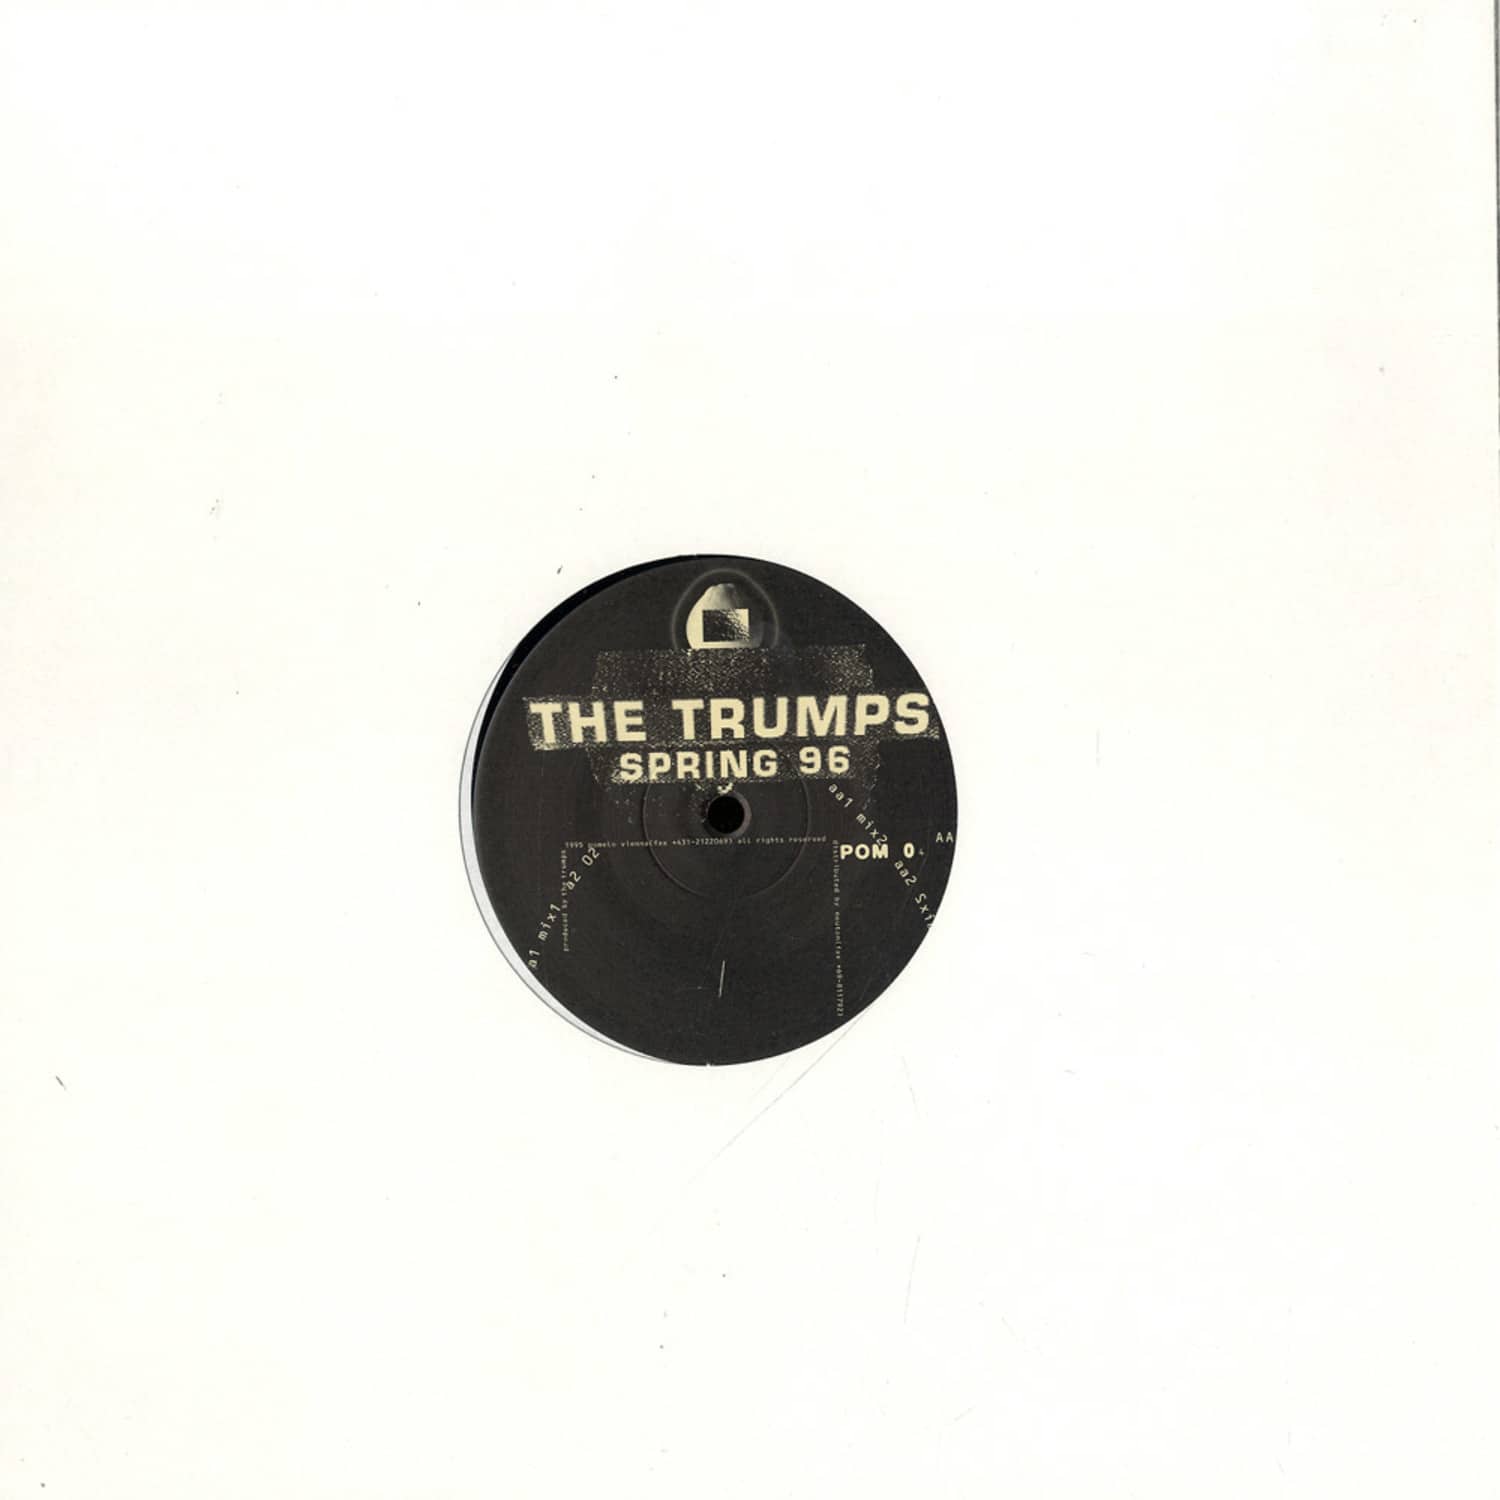 The Trumps - SPRING 96